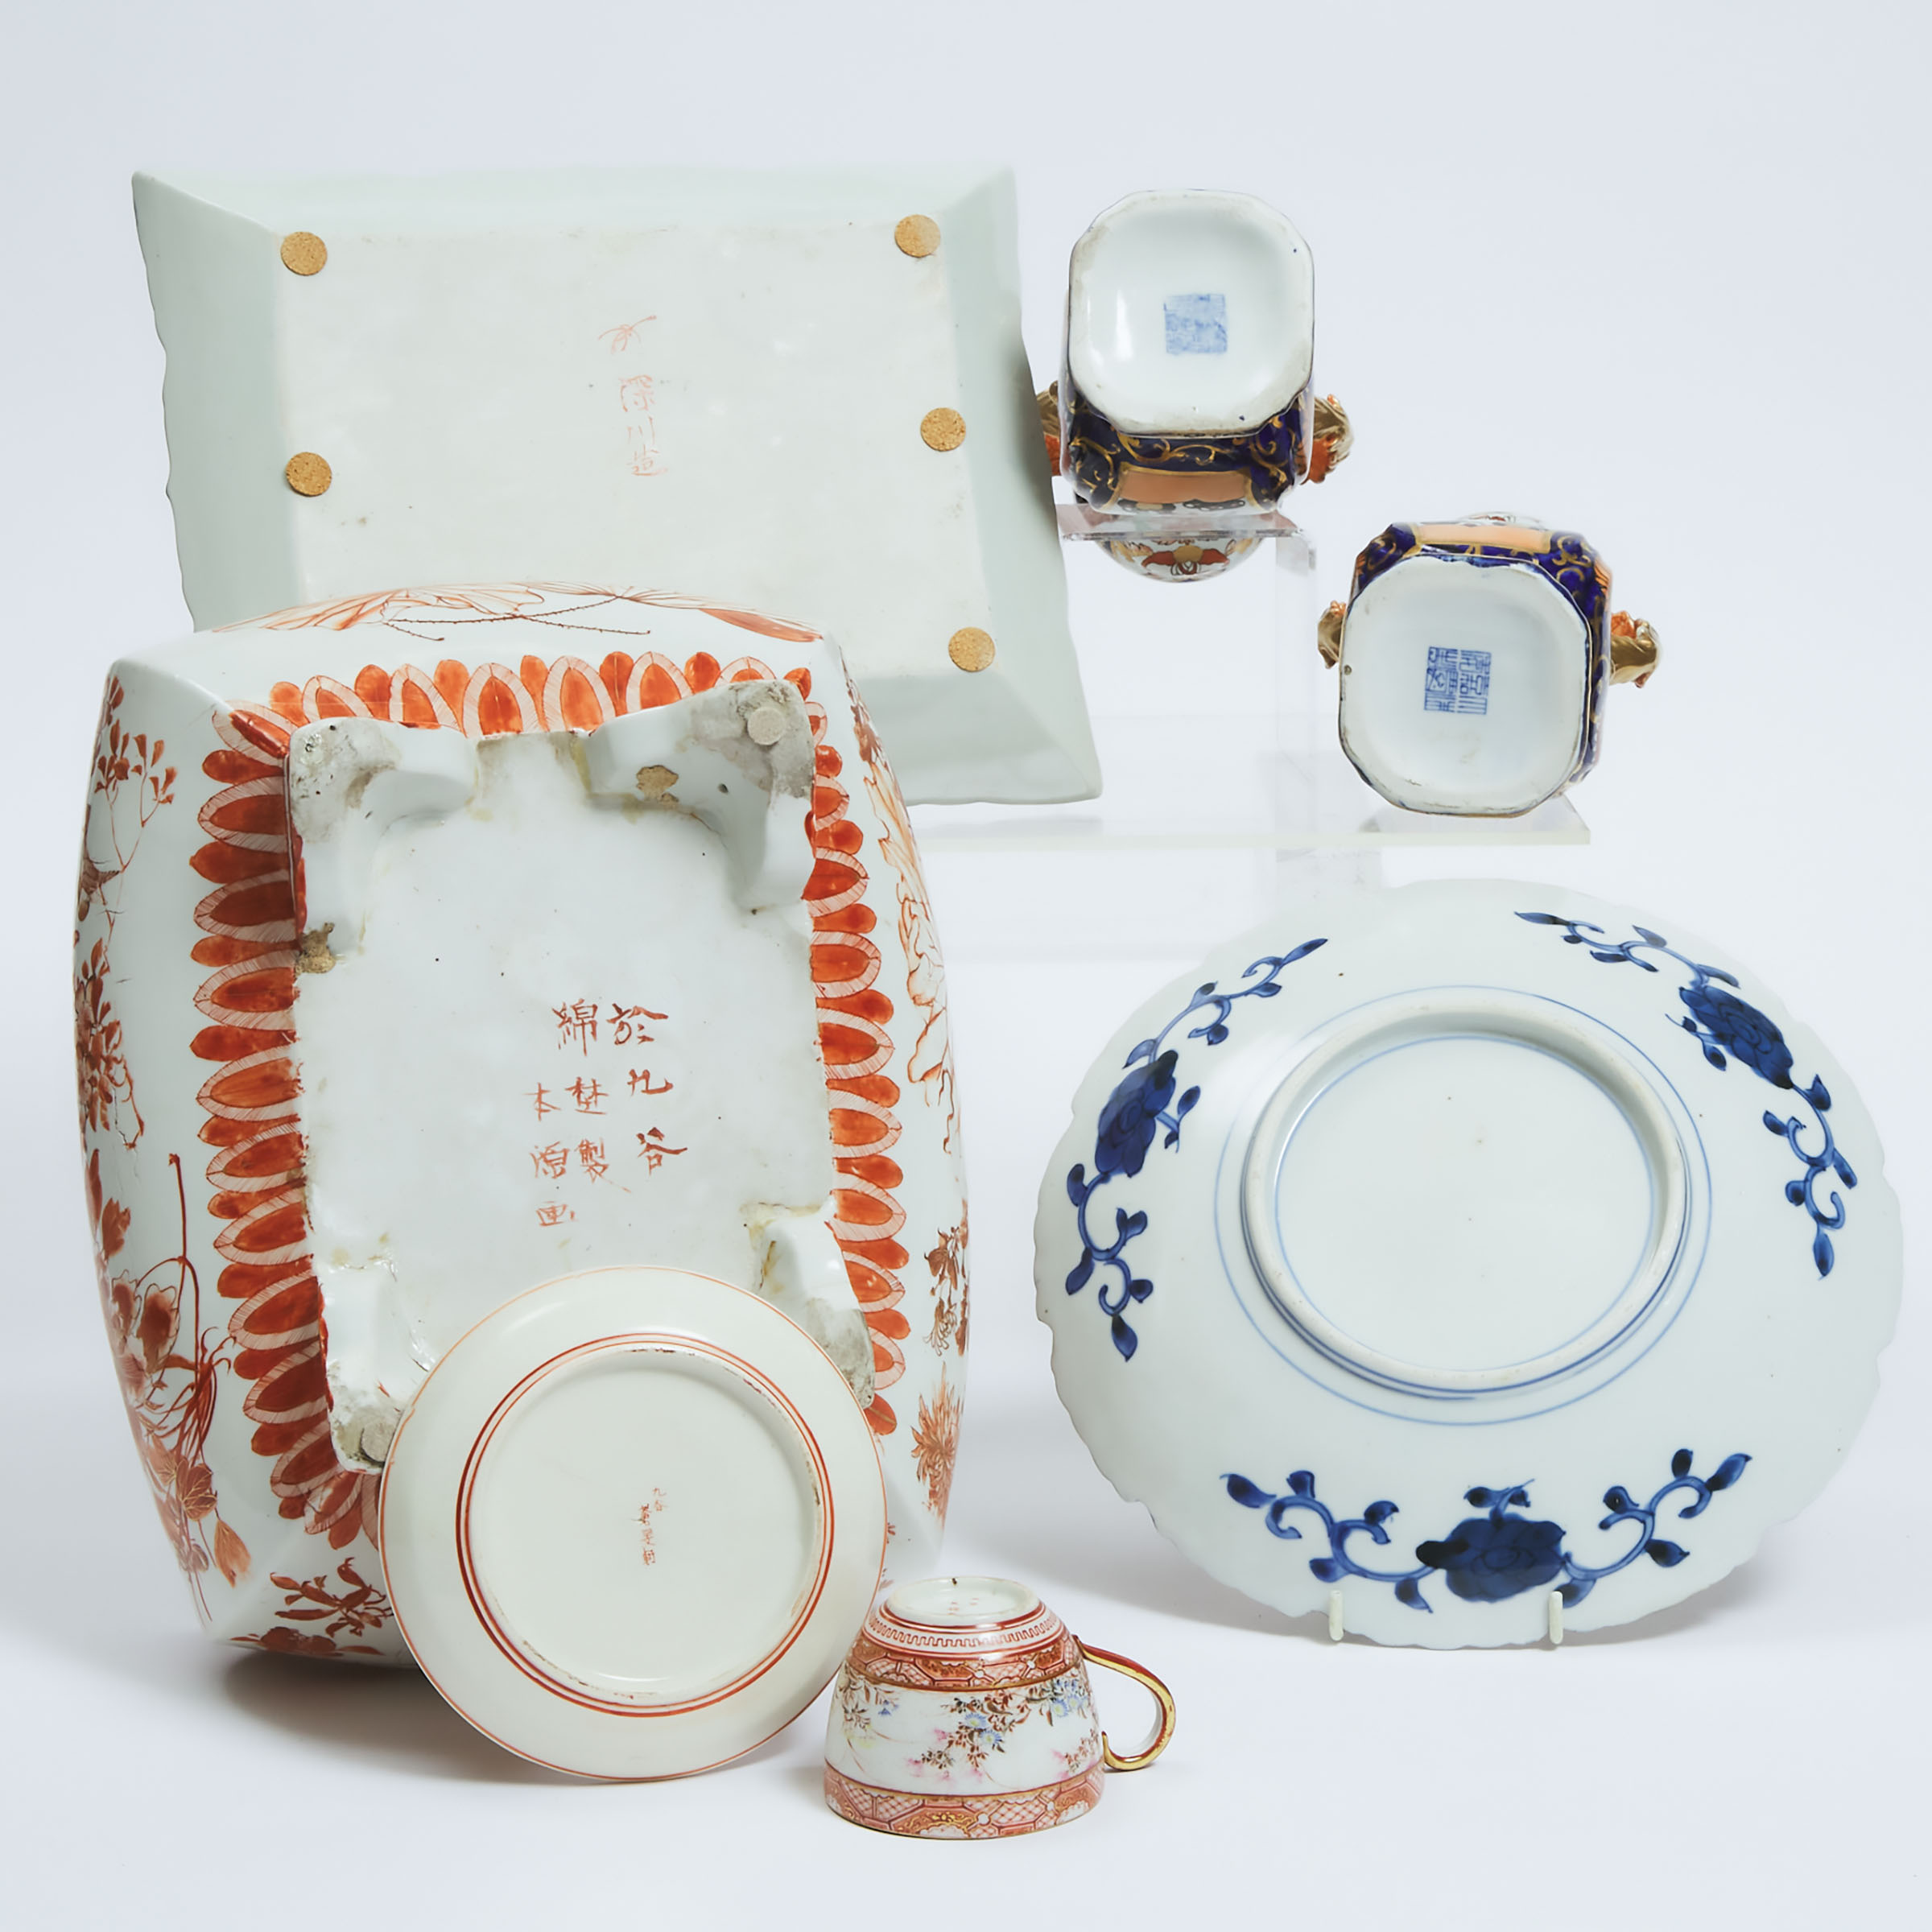 A Group of Seven Kutani and Imari Style Wares, 19th/20th Century